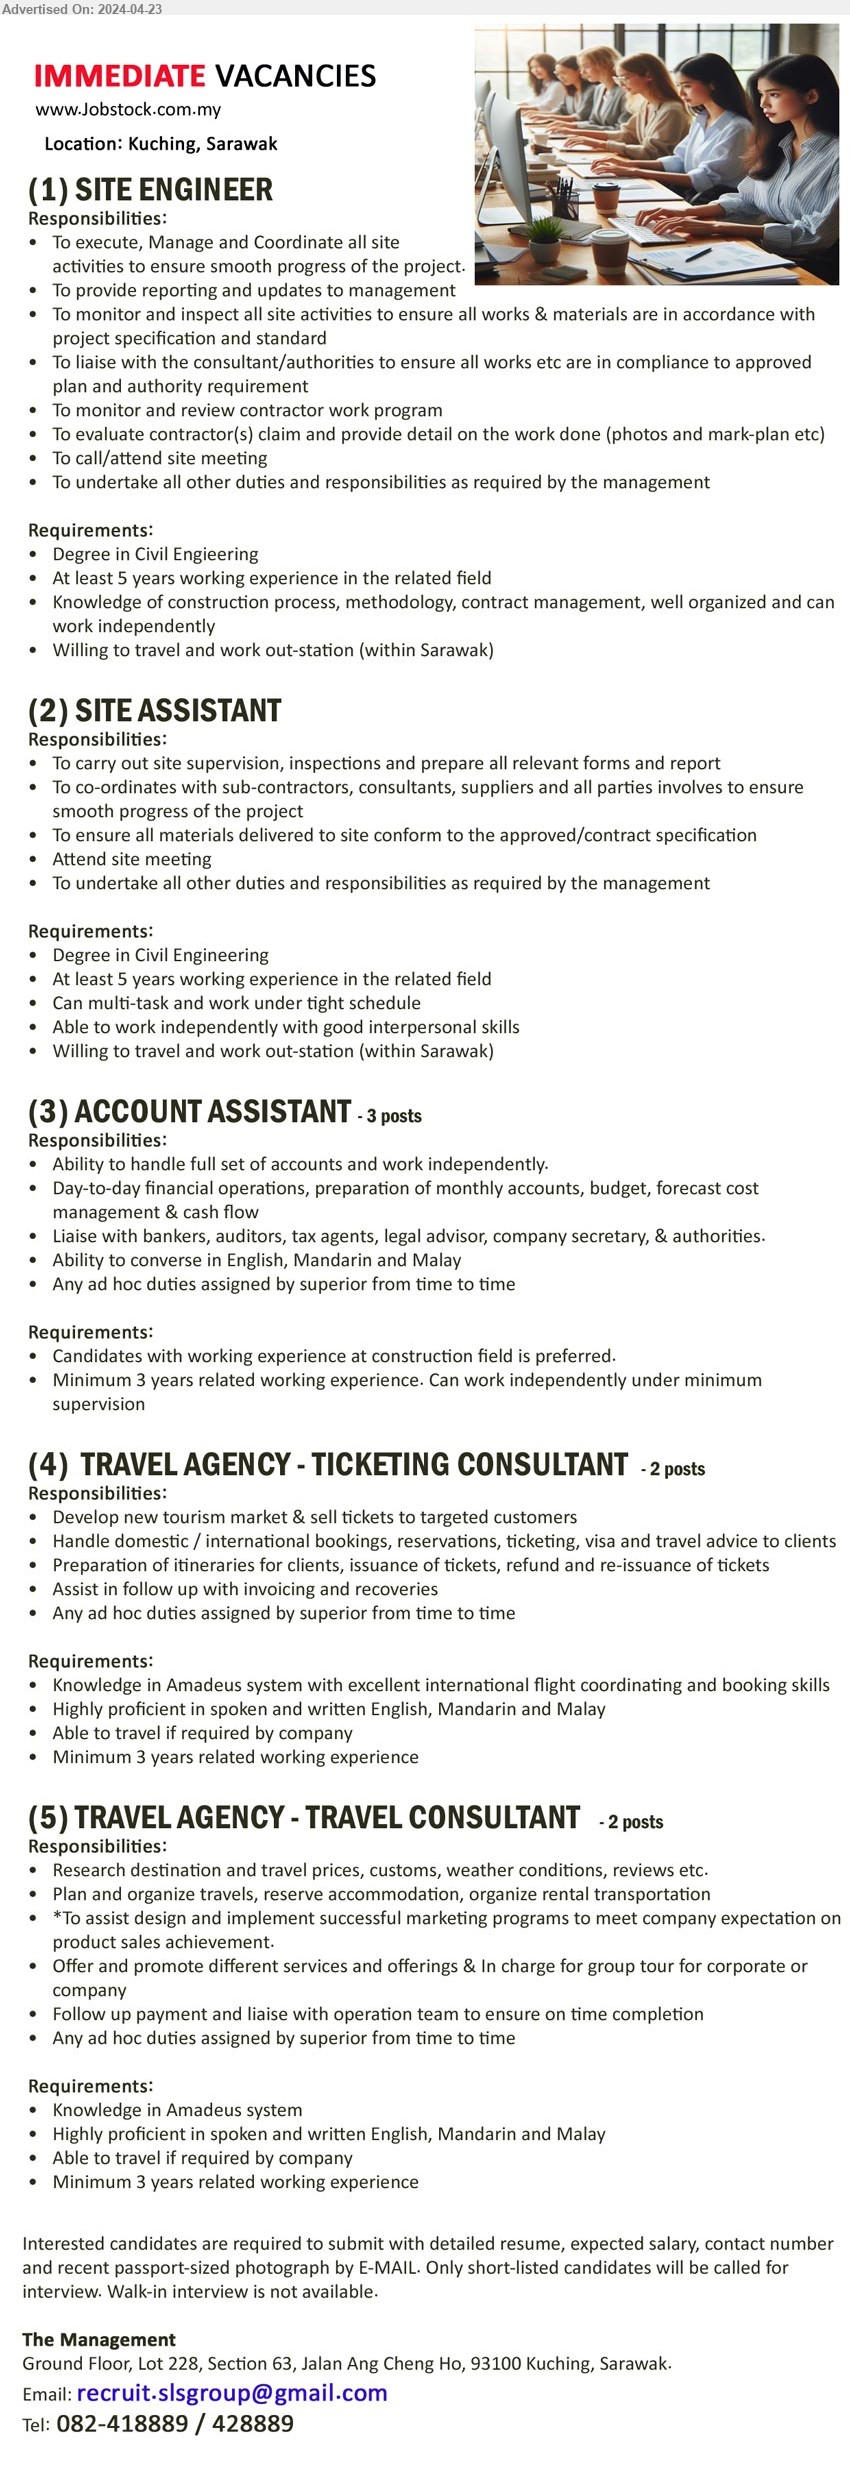 ADVERTISER - 1. SITE ENGINEER (Kuching), Degree in Civil Engineering, At least 5 years working experience in the related field,...
2. SITE ASSISTANT (Kuching), Degree in Civil Engineering, 5 yrs. exp.,...
3. ACCOUNT ASSISTANT (Kuching), Ability to handle full set of accounts and work independently., Minimum 3 years related working experience,...
4. TRAVEL AGENCY - TICKETING CONSULTANT (Kuching), Knowledge in Amadeus system with excellent international flight coordinating and booking skills,...
5. TRAVEL AGENCY - TRAVEL CONSULTANT  (Kuching), Knowledge in Amadeus system, Minimum 3 years related working experience,...
Tel: 082-418889 / 082-428889 / Email resume to ...
